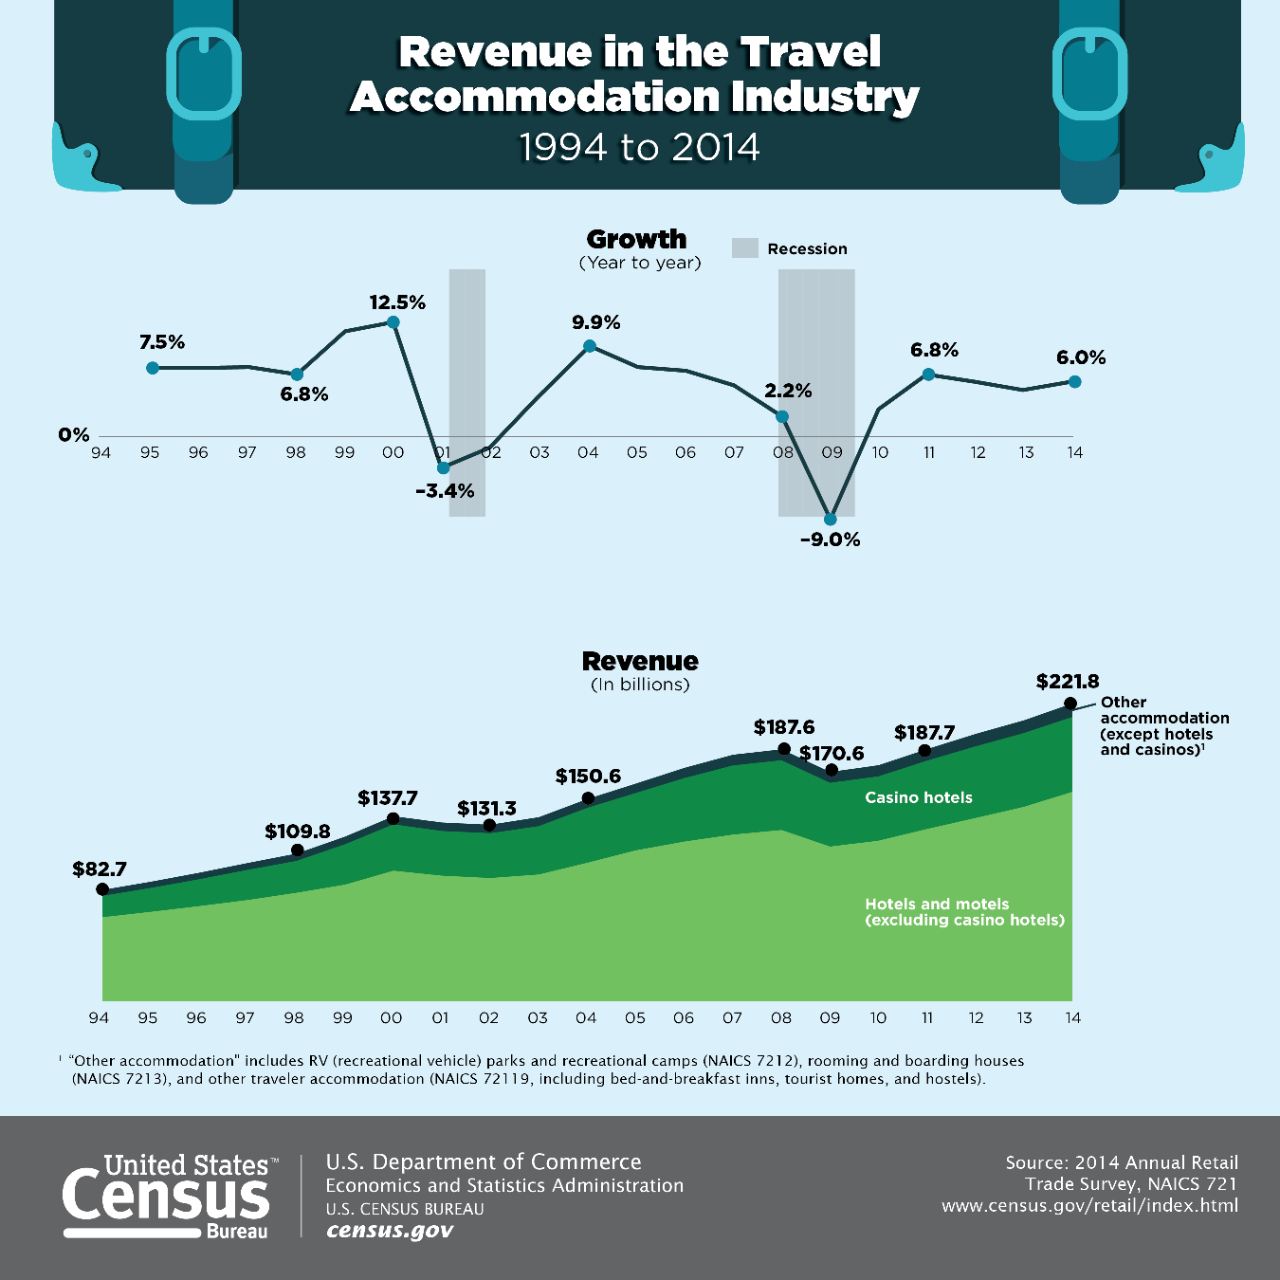 Revenue in the Travel Accommodation Industry